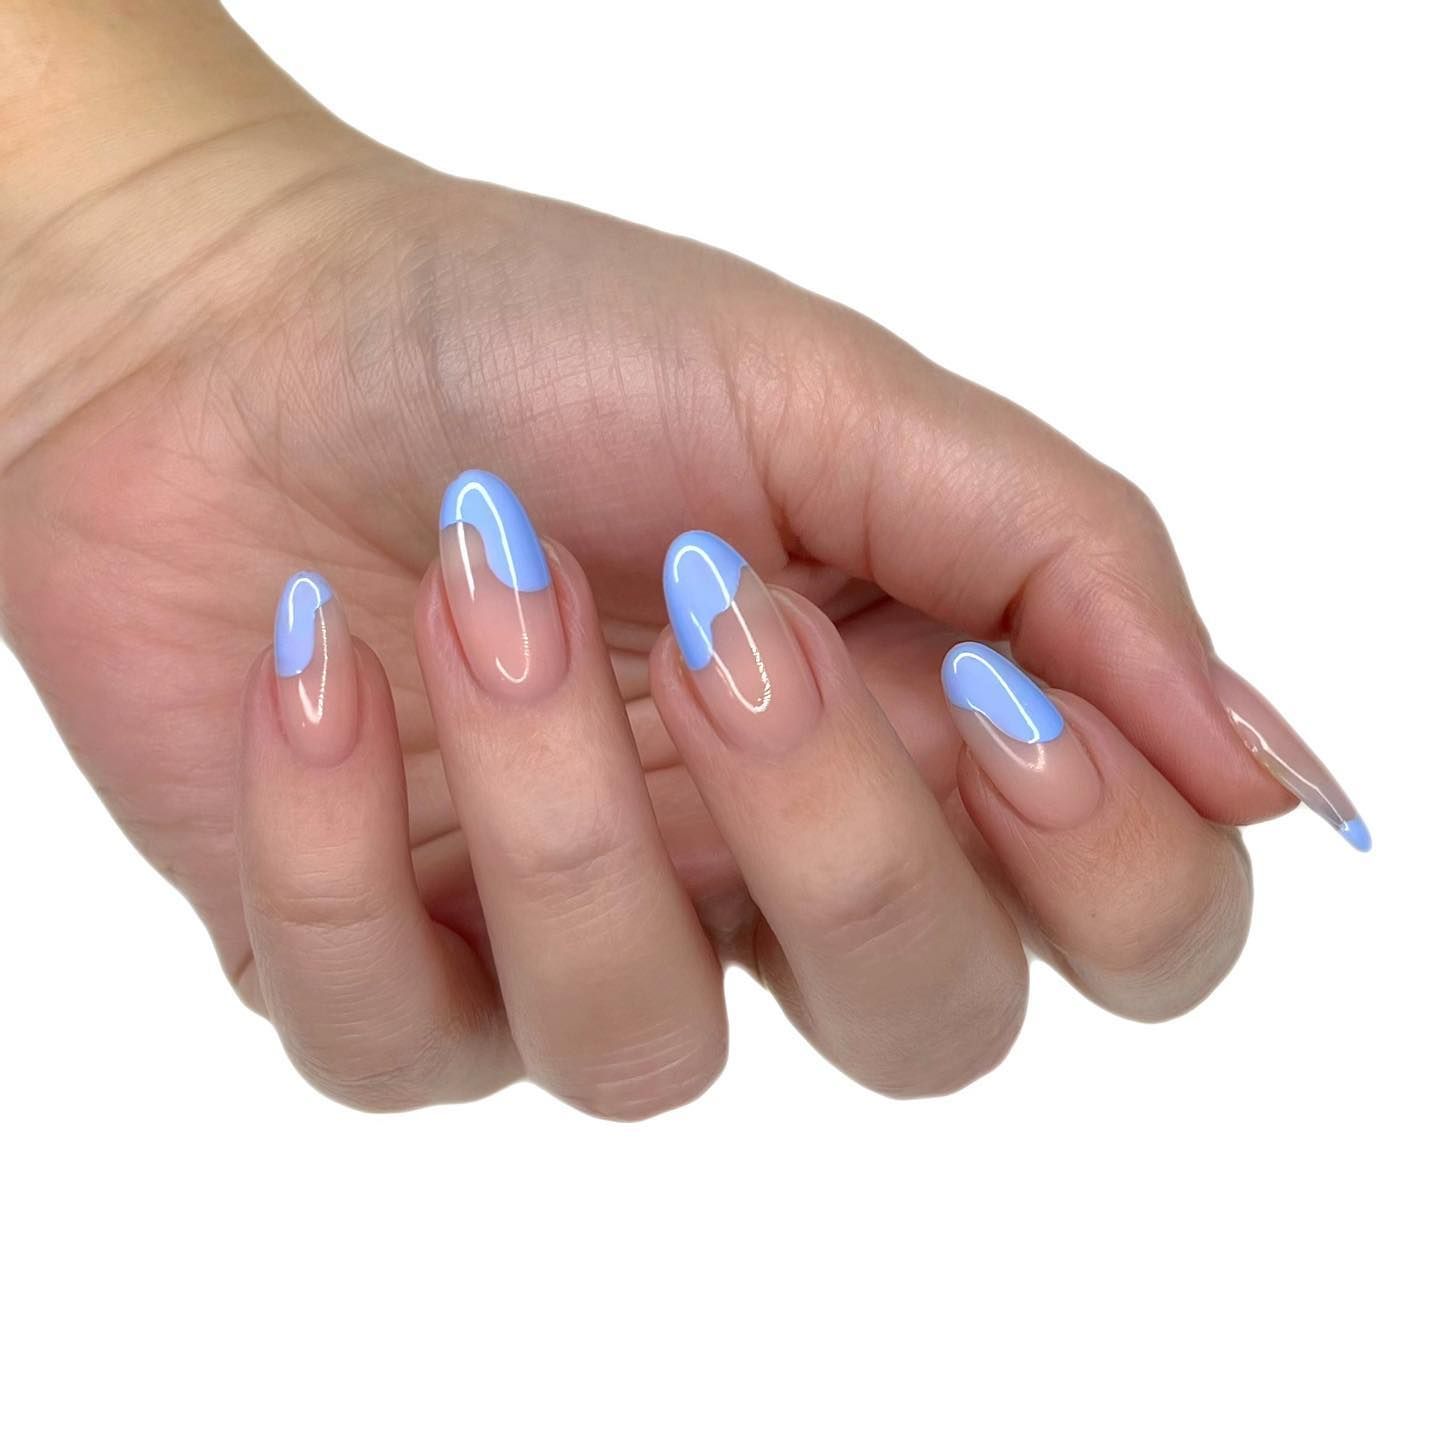 Hard Gel Nails: Everything You Need to Know | Glamour